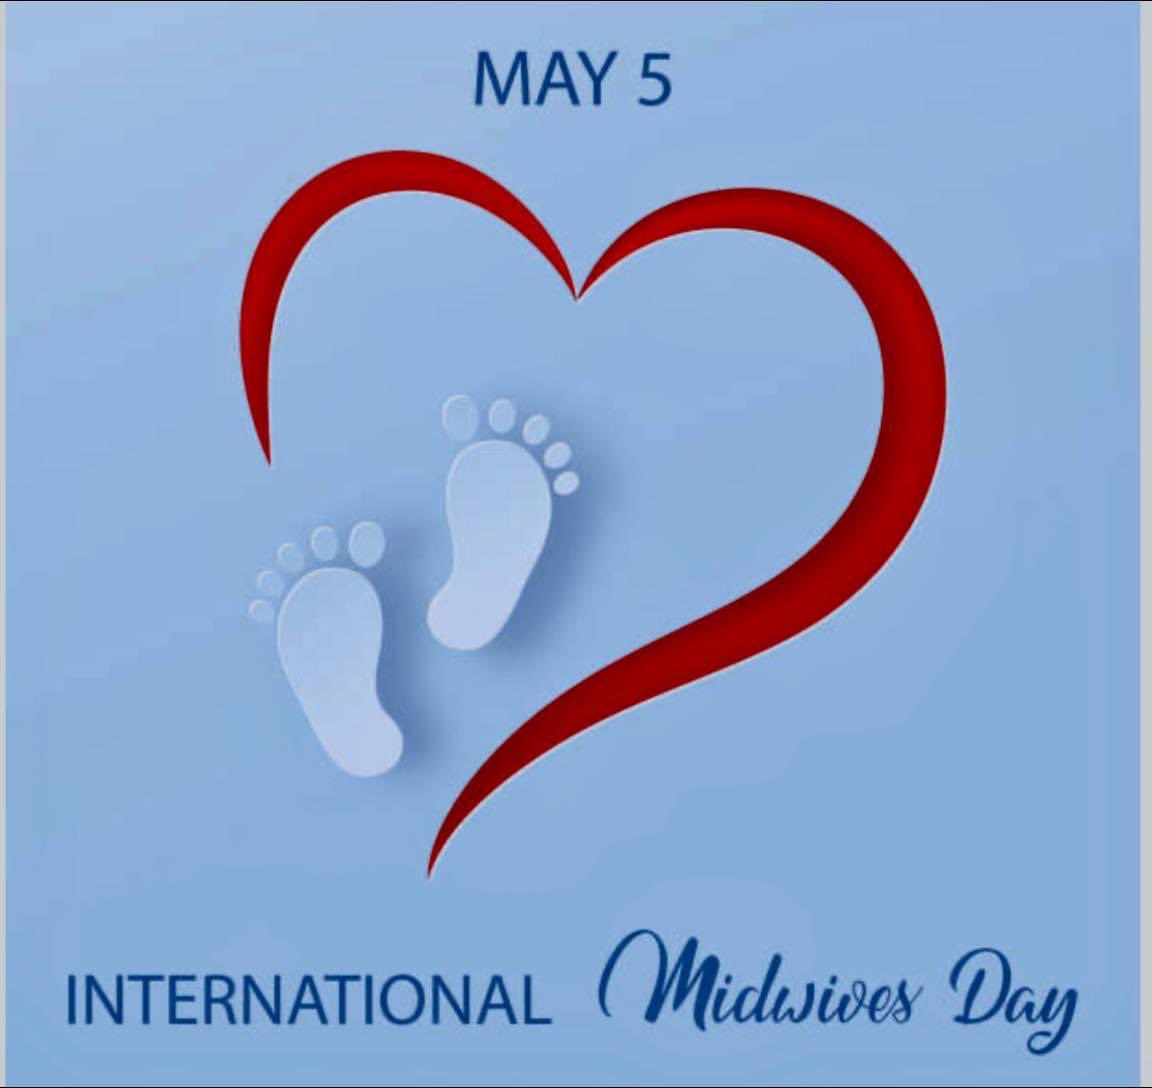 To all my #midwifery colleagues out there who work hard to support and empower women and families globally #InternationalDayoftheMidwife #IDM2023